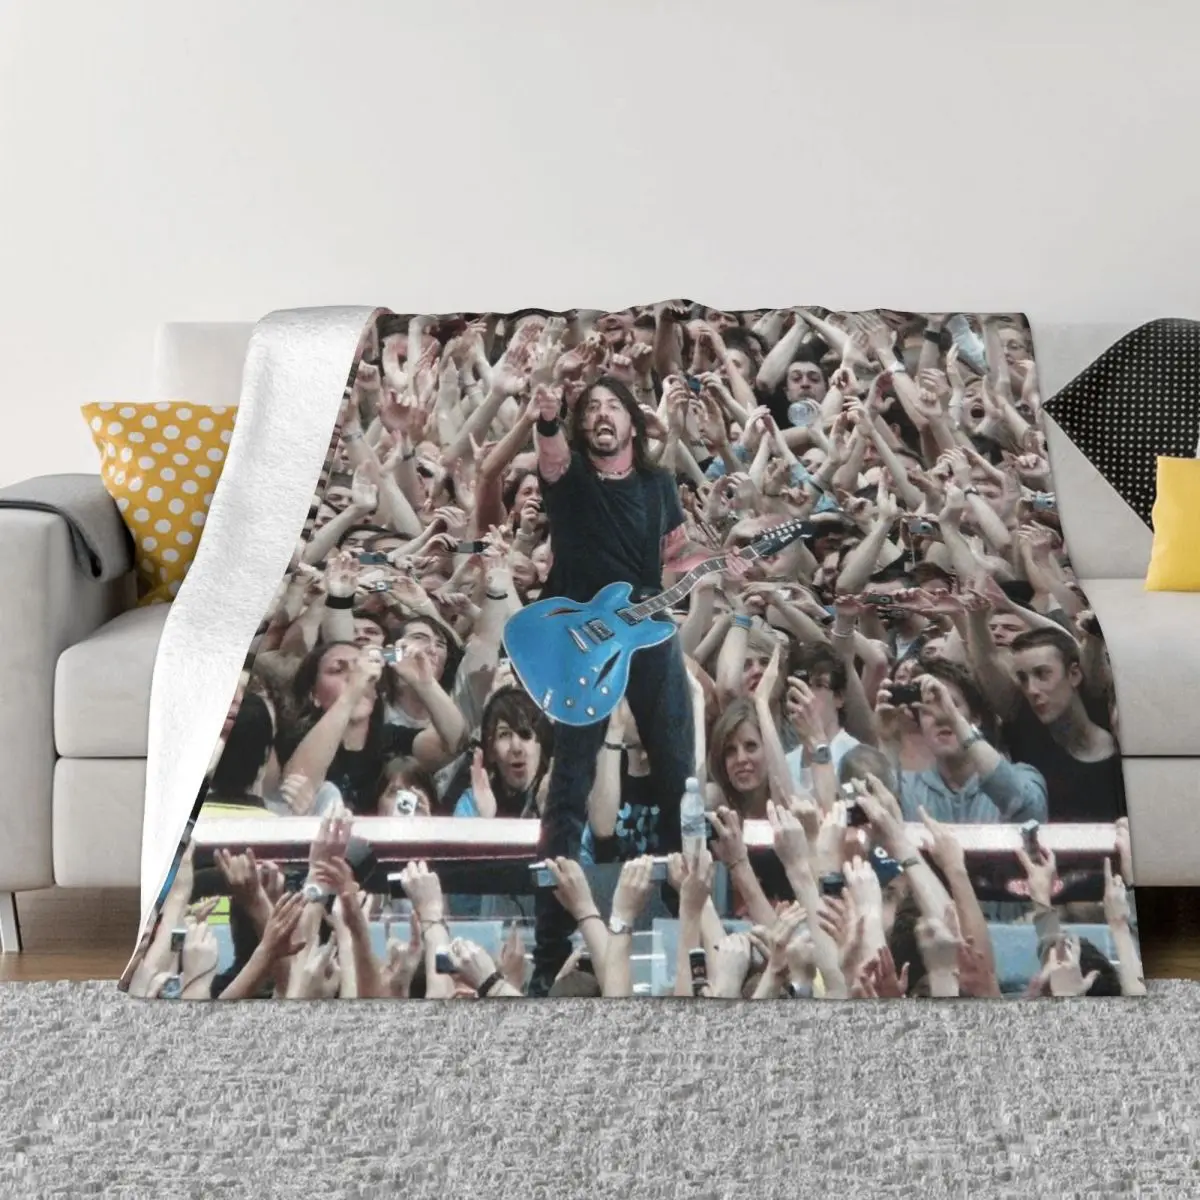 

Dave Grohl Rock Singer Band Blanket Flannel Textile Decor Breathable Soft Throw Blanket for Bedding Office Plush Thin Quilt